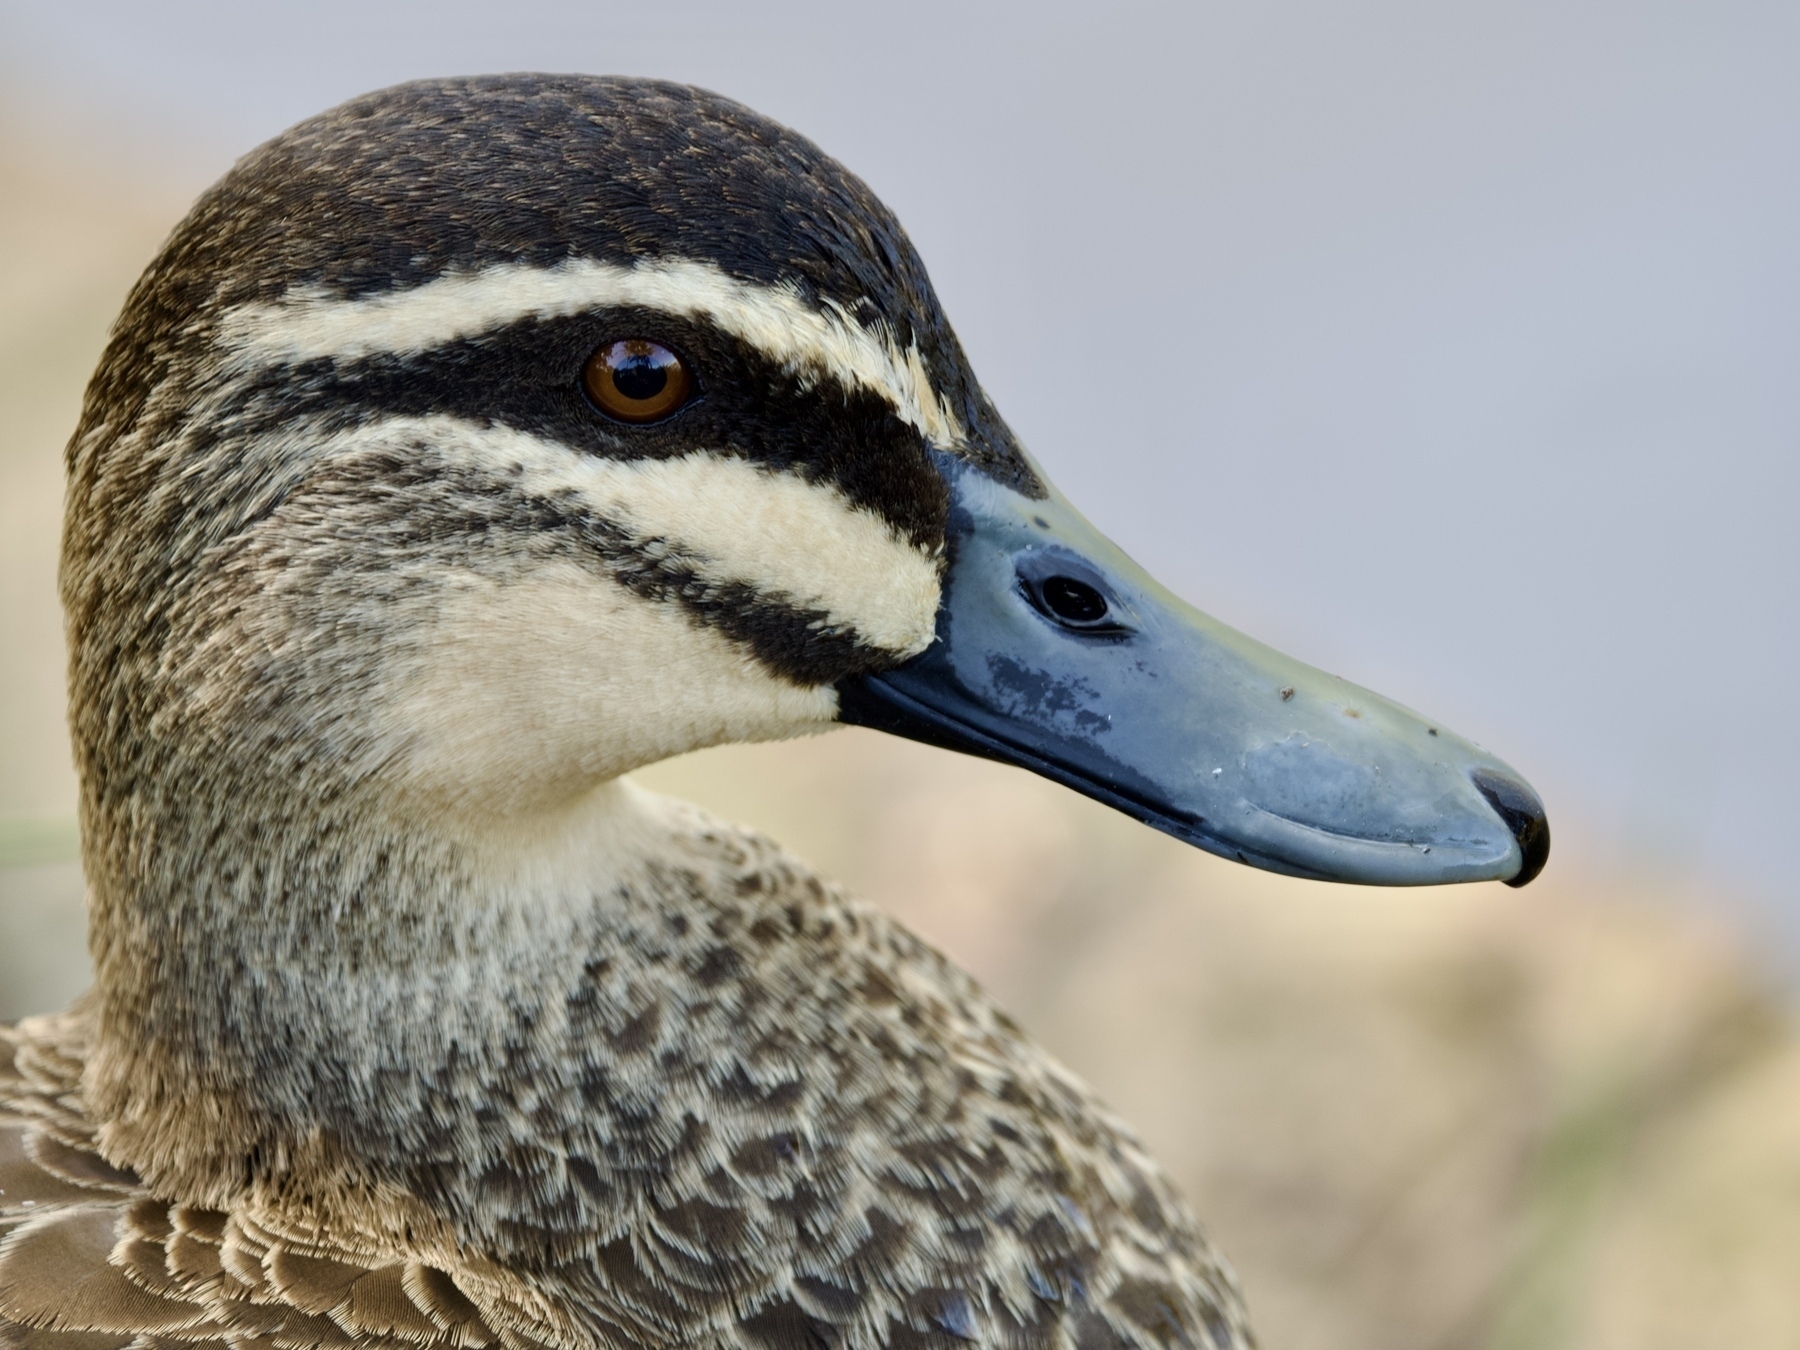 A close-up of a duck, staring straight at the camera